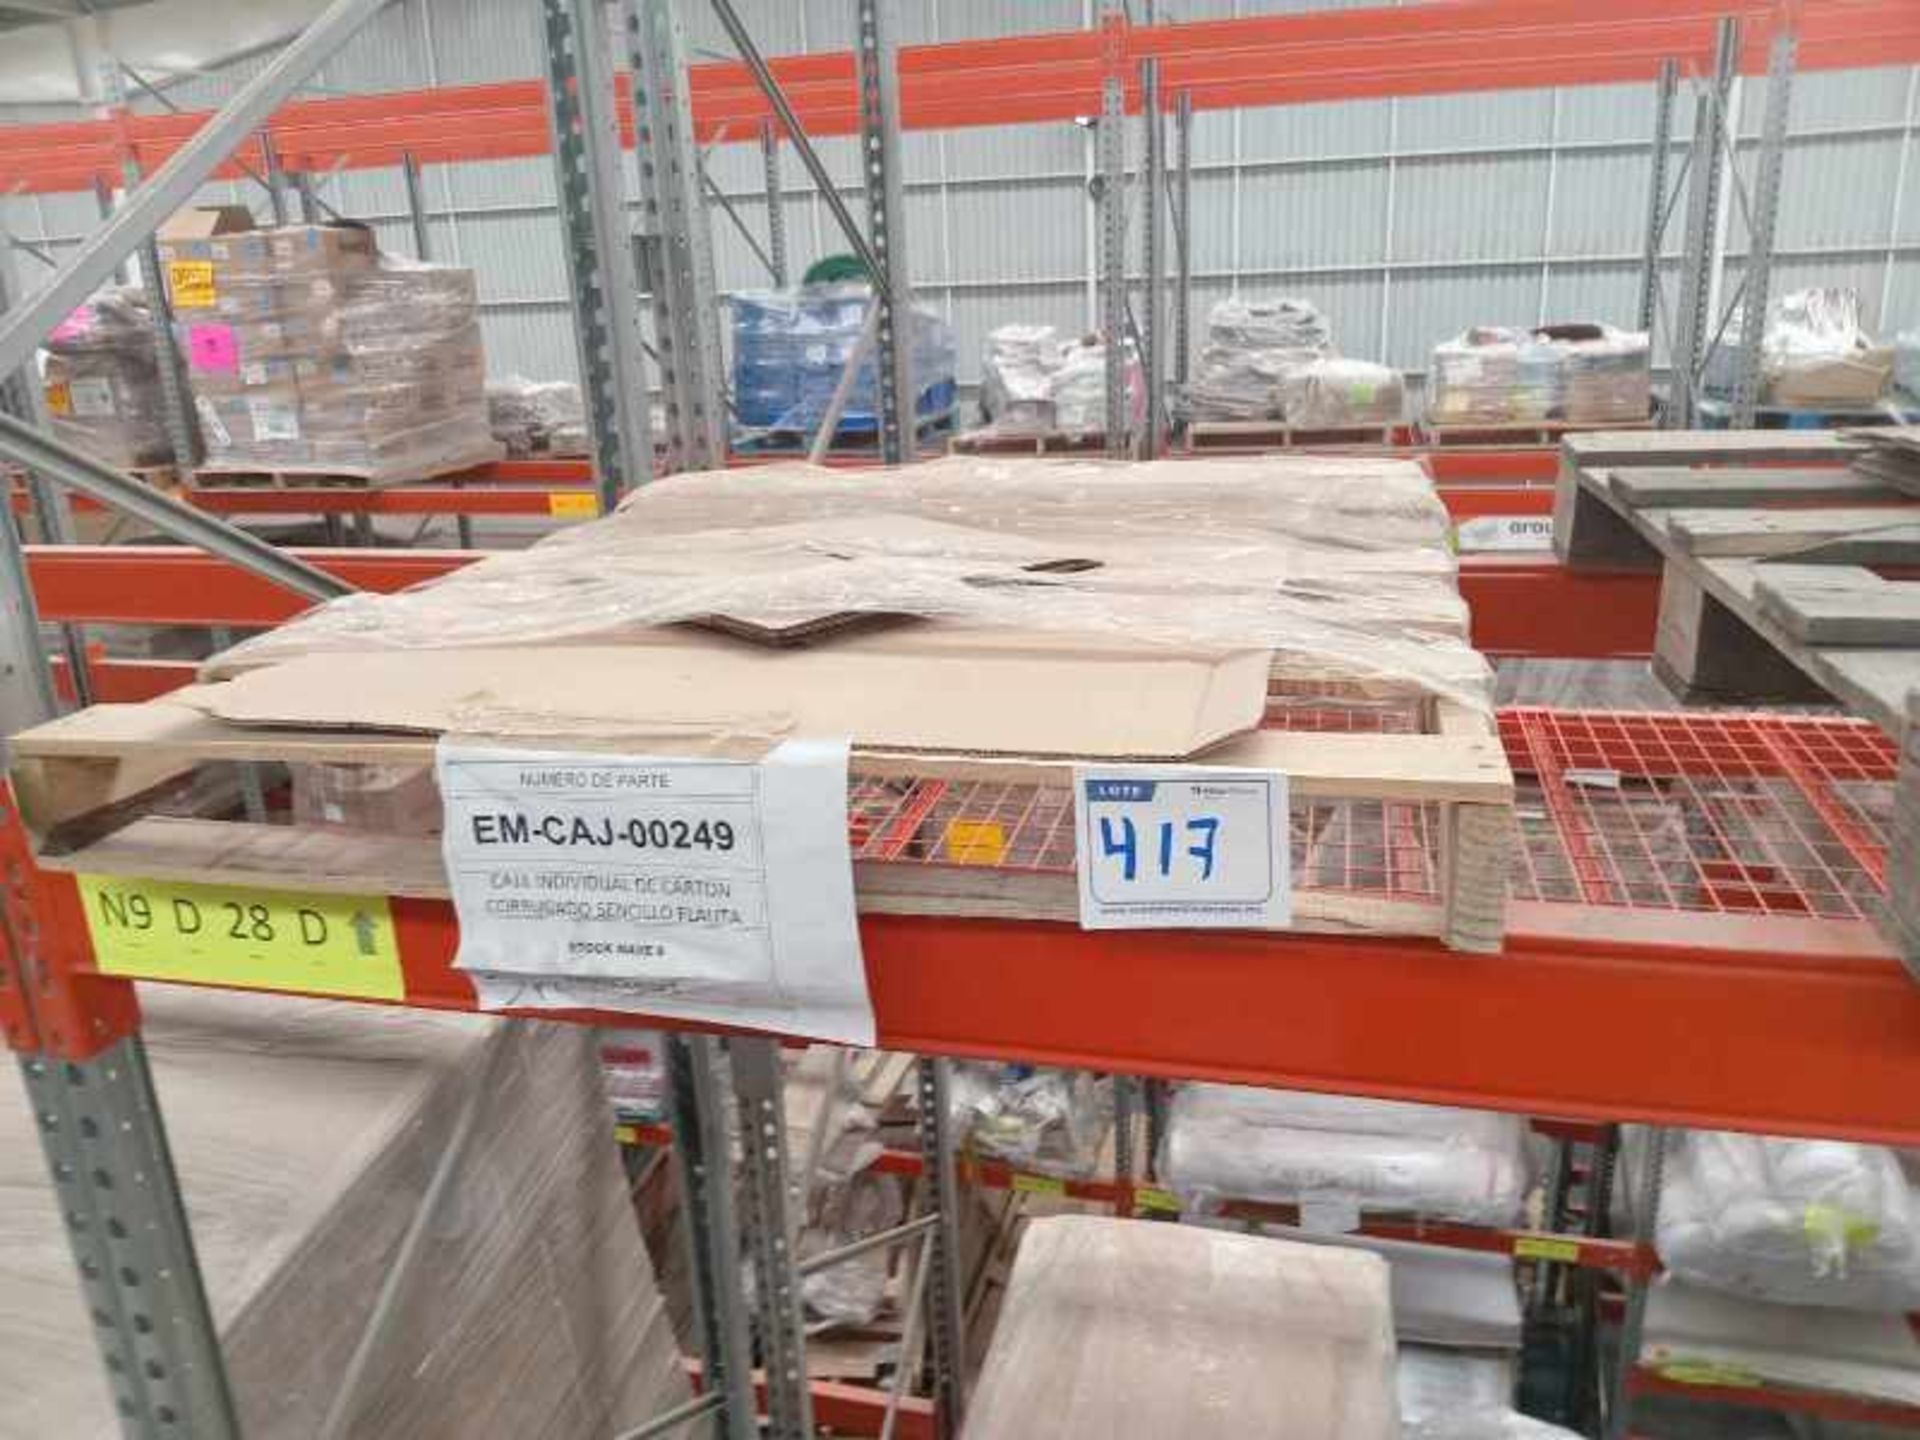 LOT OF APPROXIMATELY (83,310) PCS OF CARDBOARD BOXES AND ACCESSORIES - Image 52 of 119